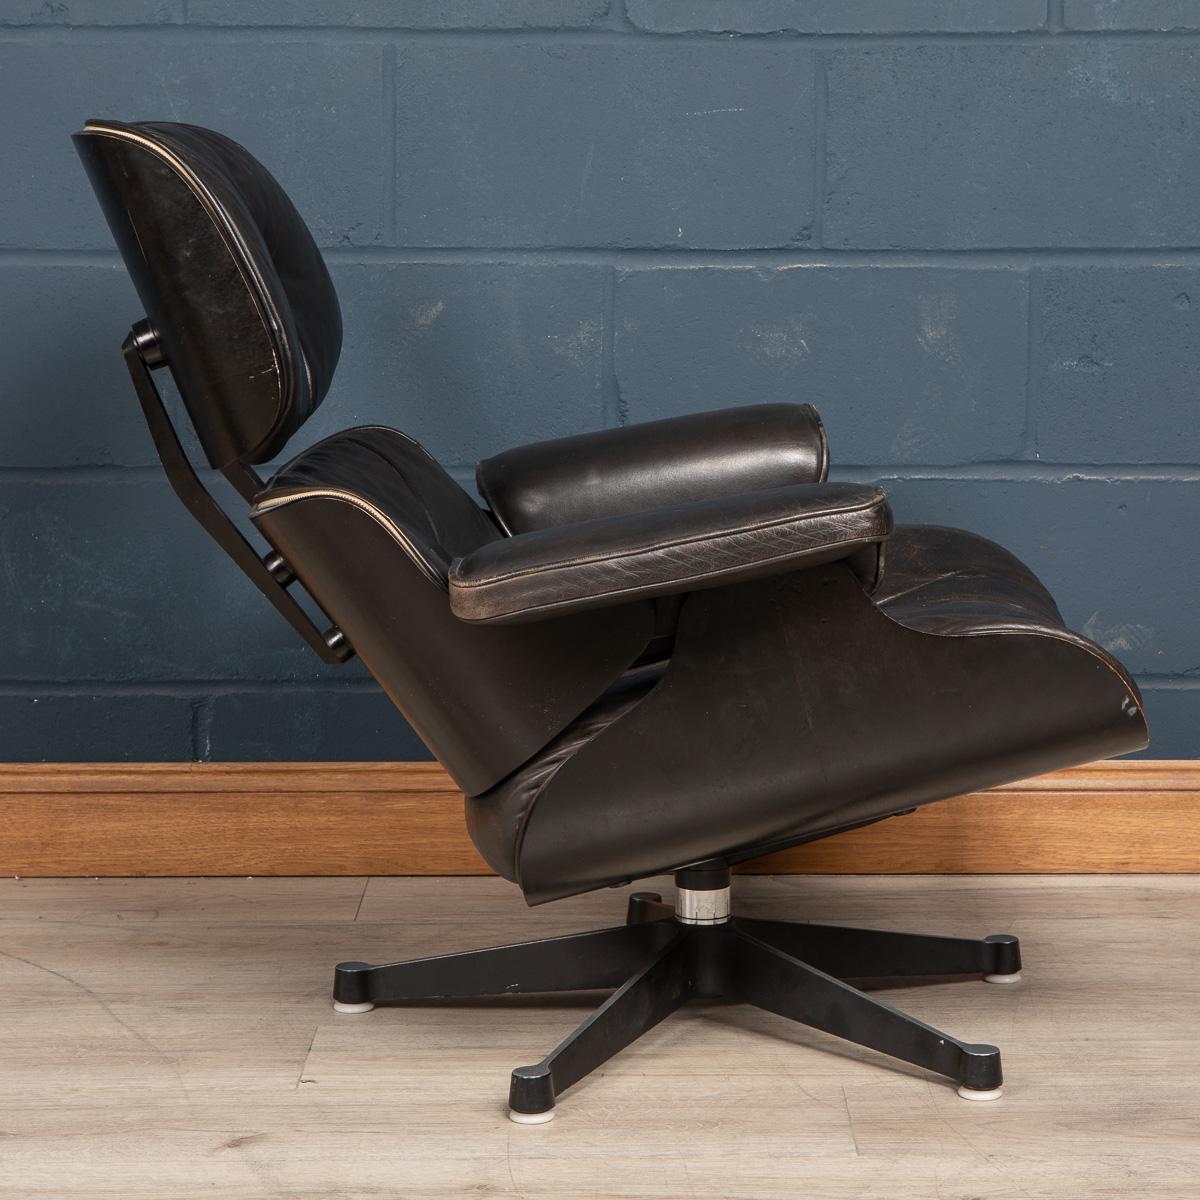 Plywood 20th Century Black Eames Leather Lounge Chair & Ottoman by Vitra, c.1980